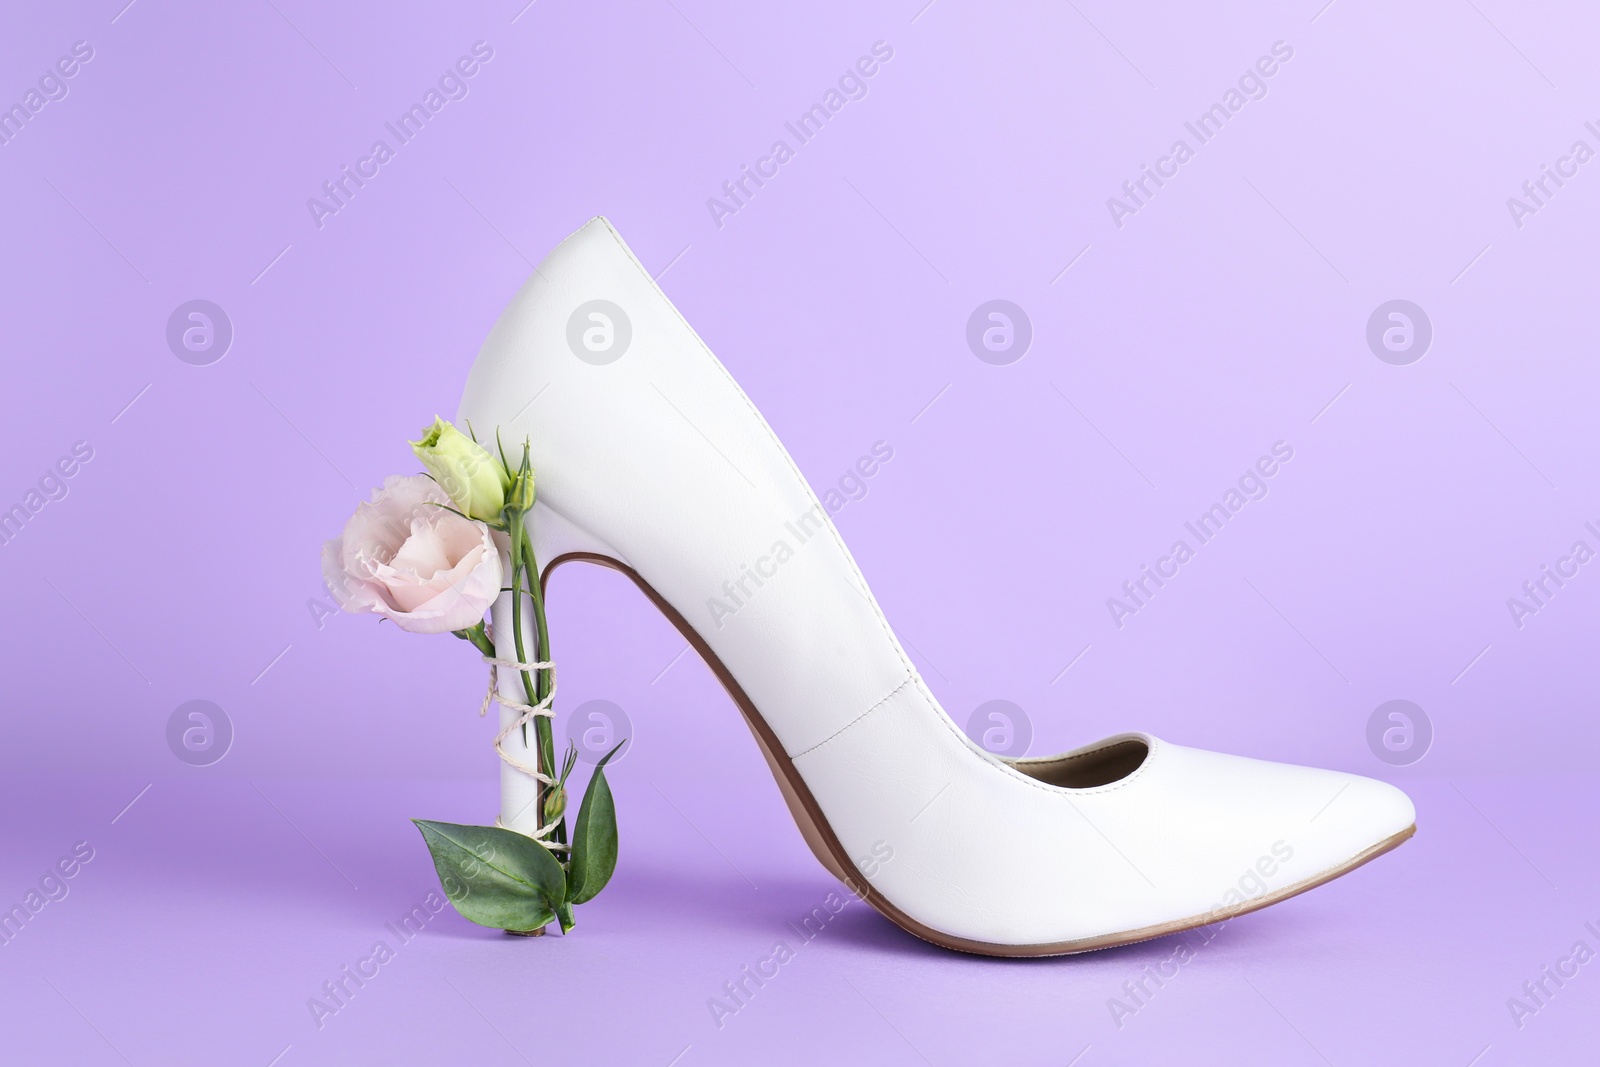 Photo of Stylish women's high heeled shoe with beautiful flower on violet background